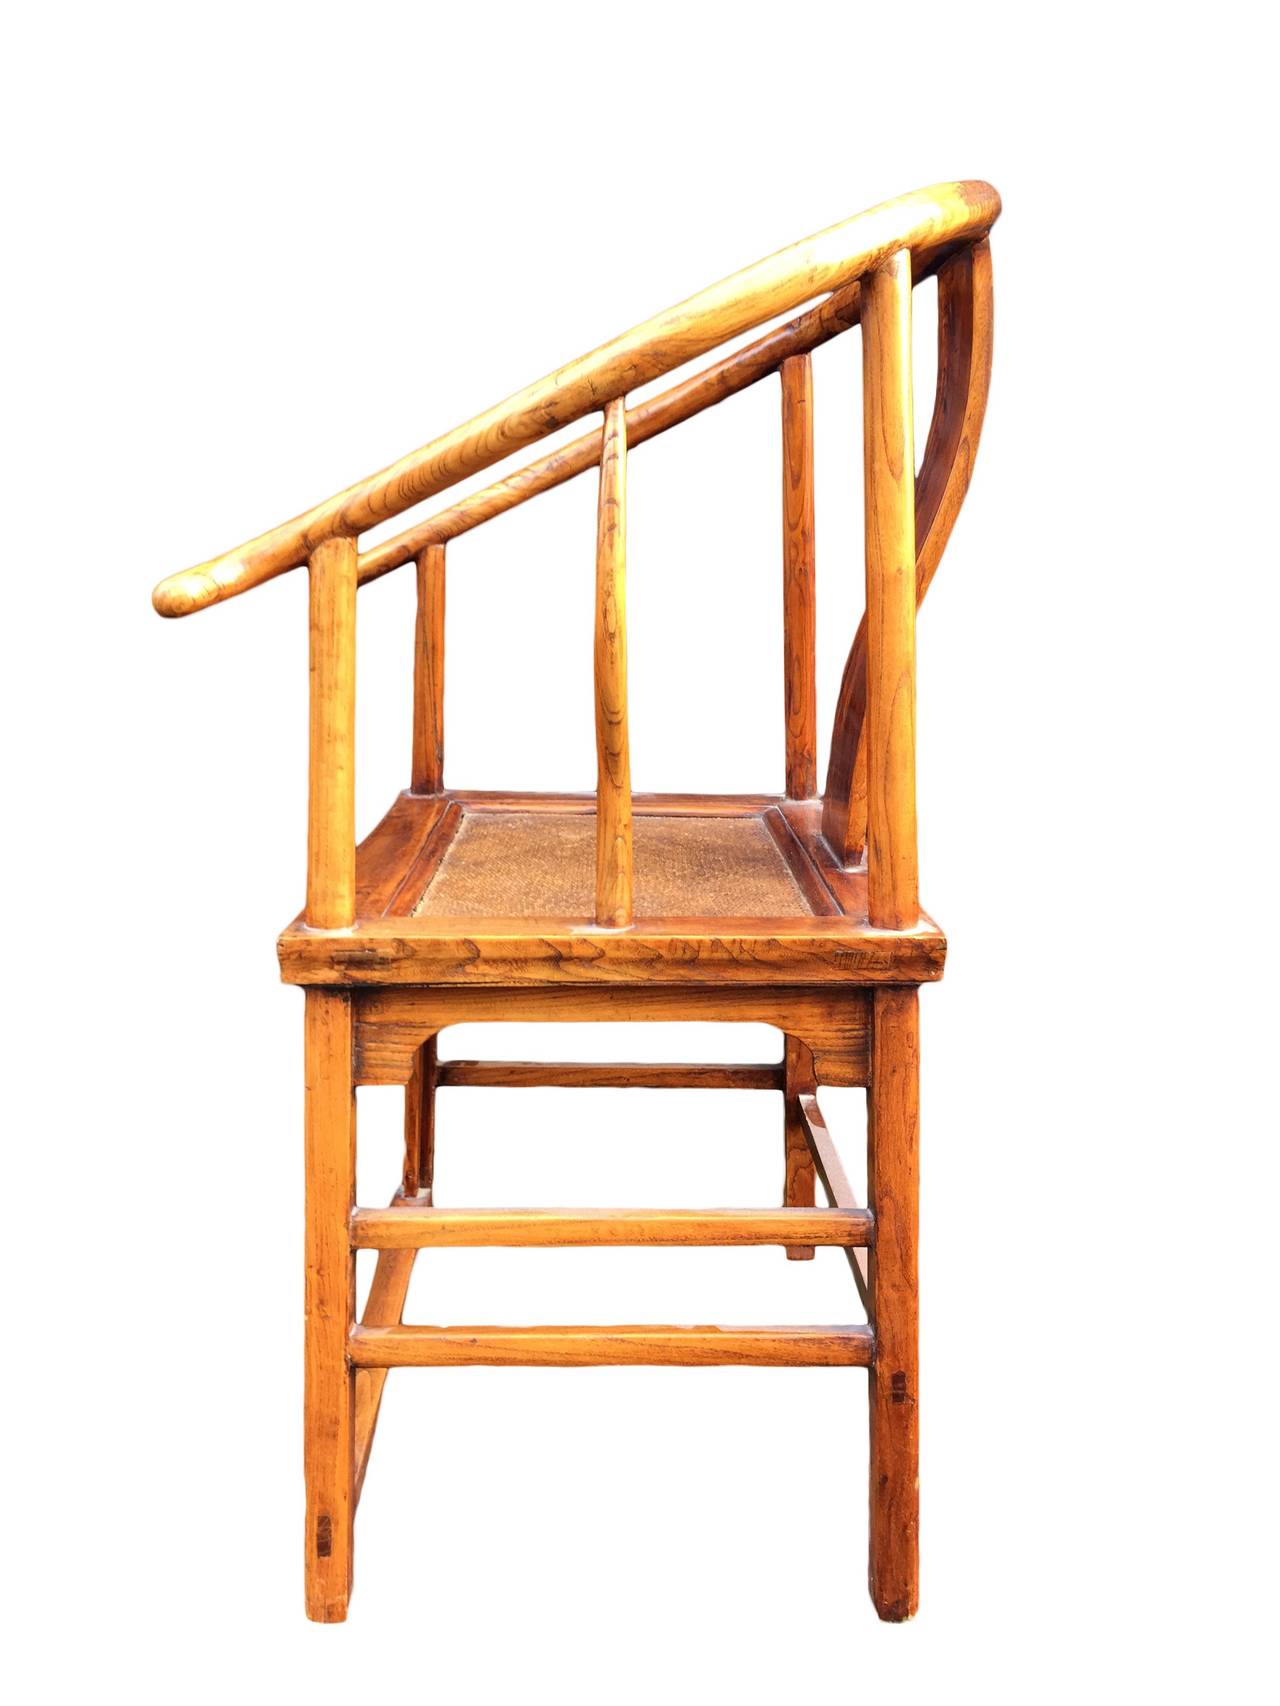 Early 20thC Chinese jointed Horseshoe chair.
Sweeping gooseneck arms. Original inset cane seat.